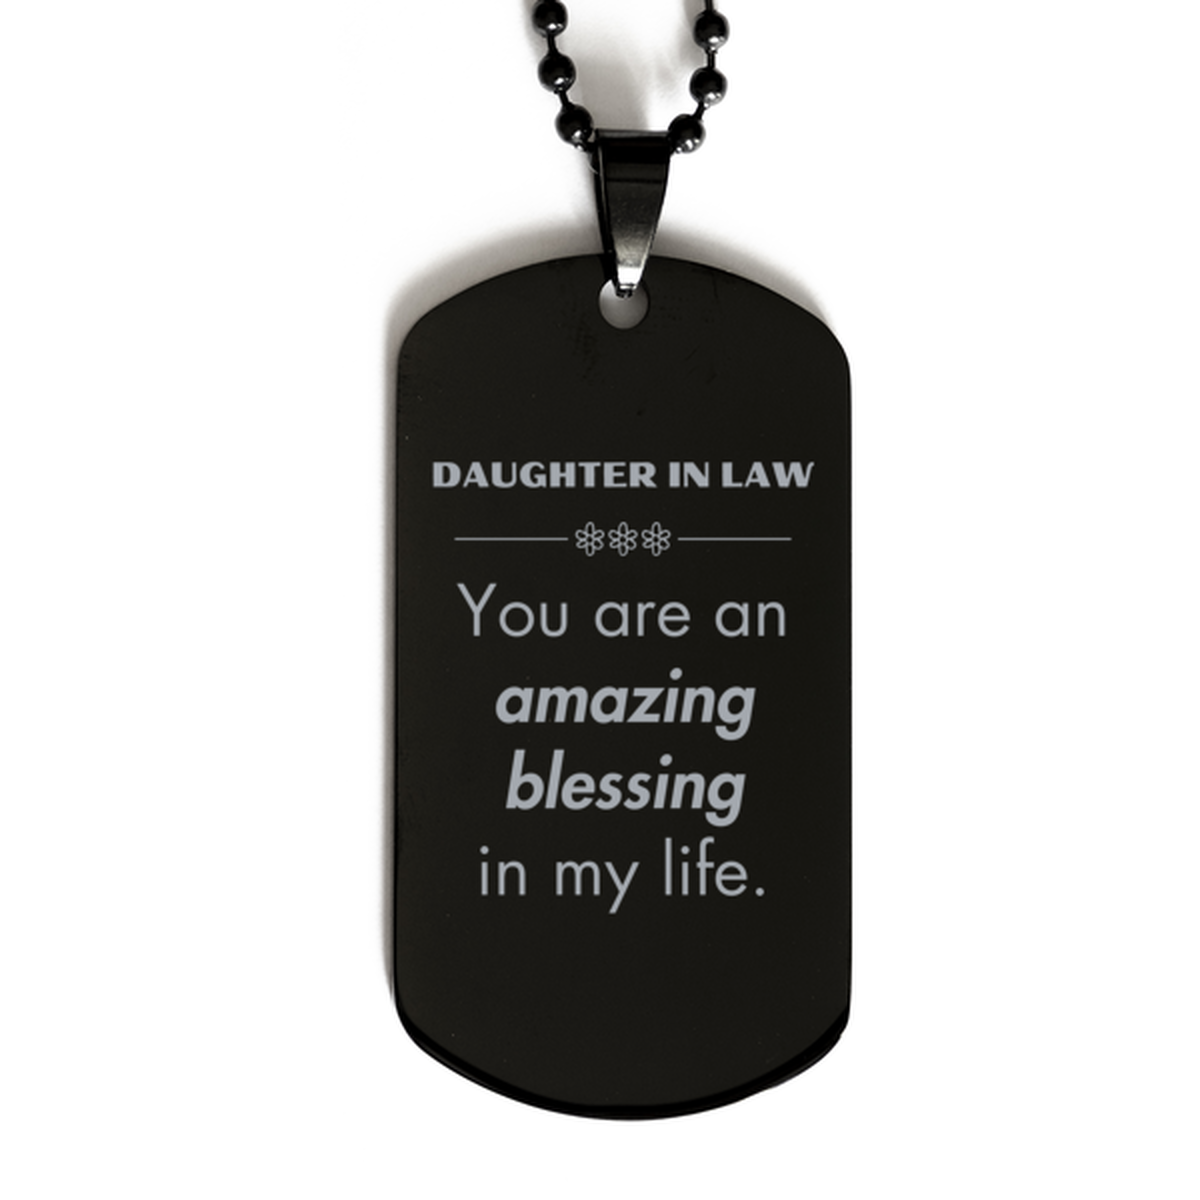 Daughter In Law Black Dog Tag, You are an amazing blessing in my life, Thank You Gifts For Daughter In Law, Inspirational Birthday Christmas Unique Gifts For Daughter In Law